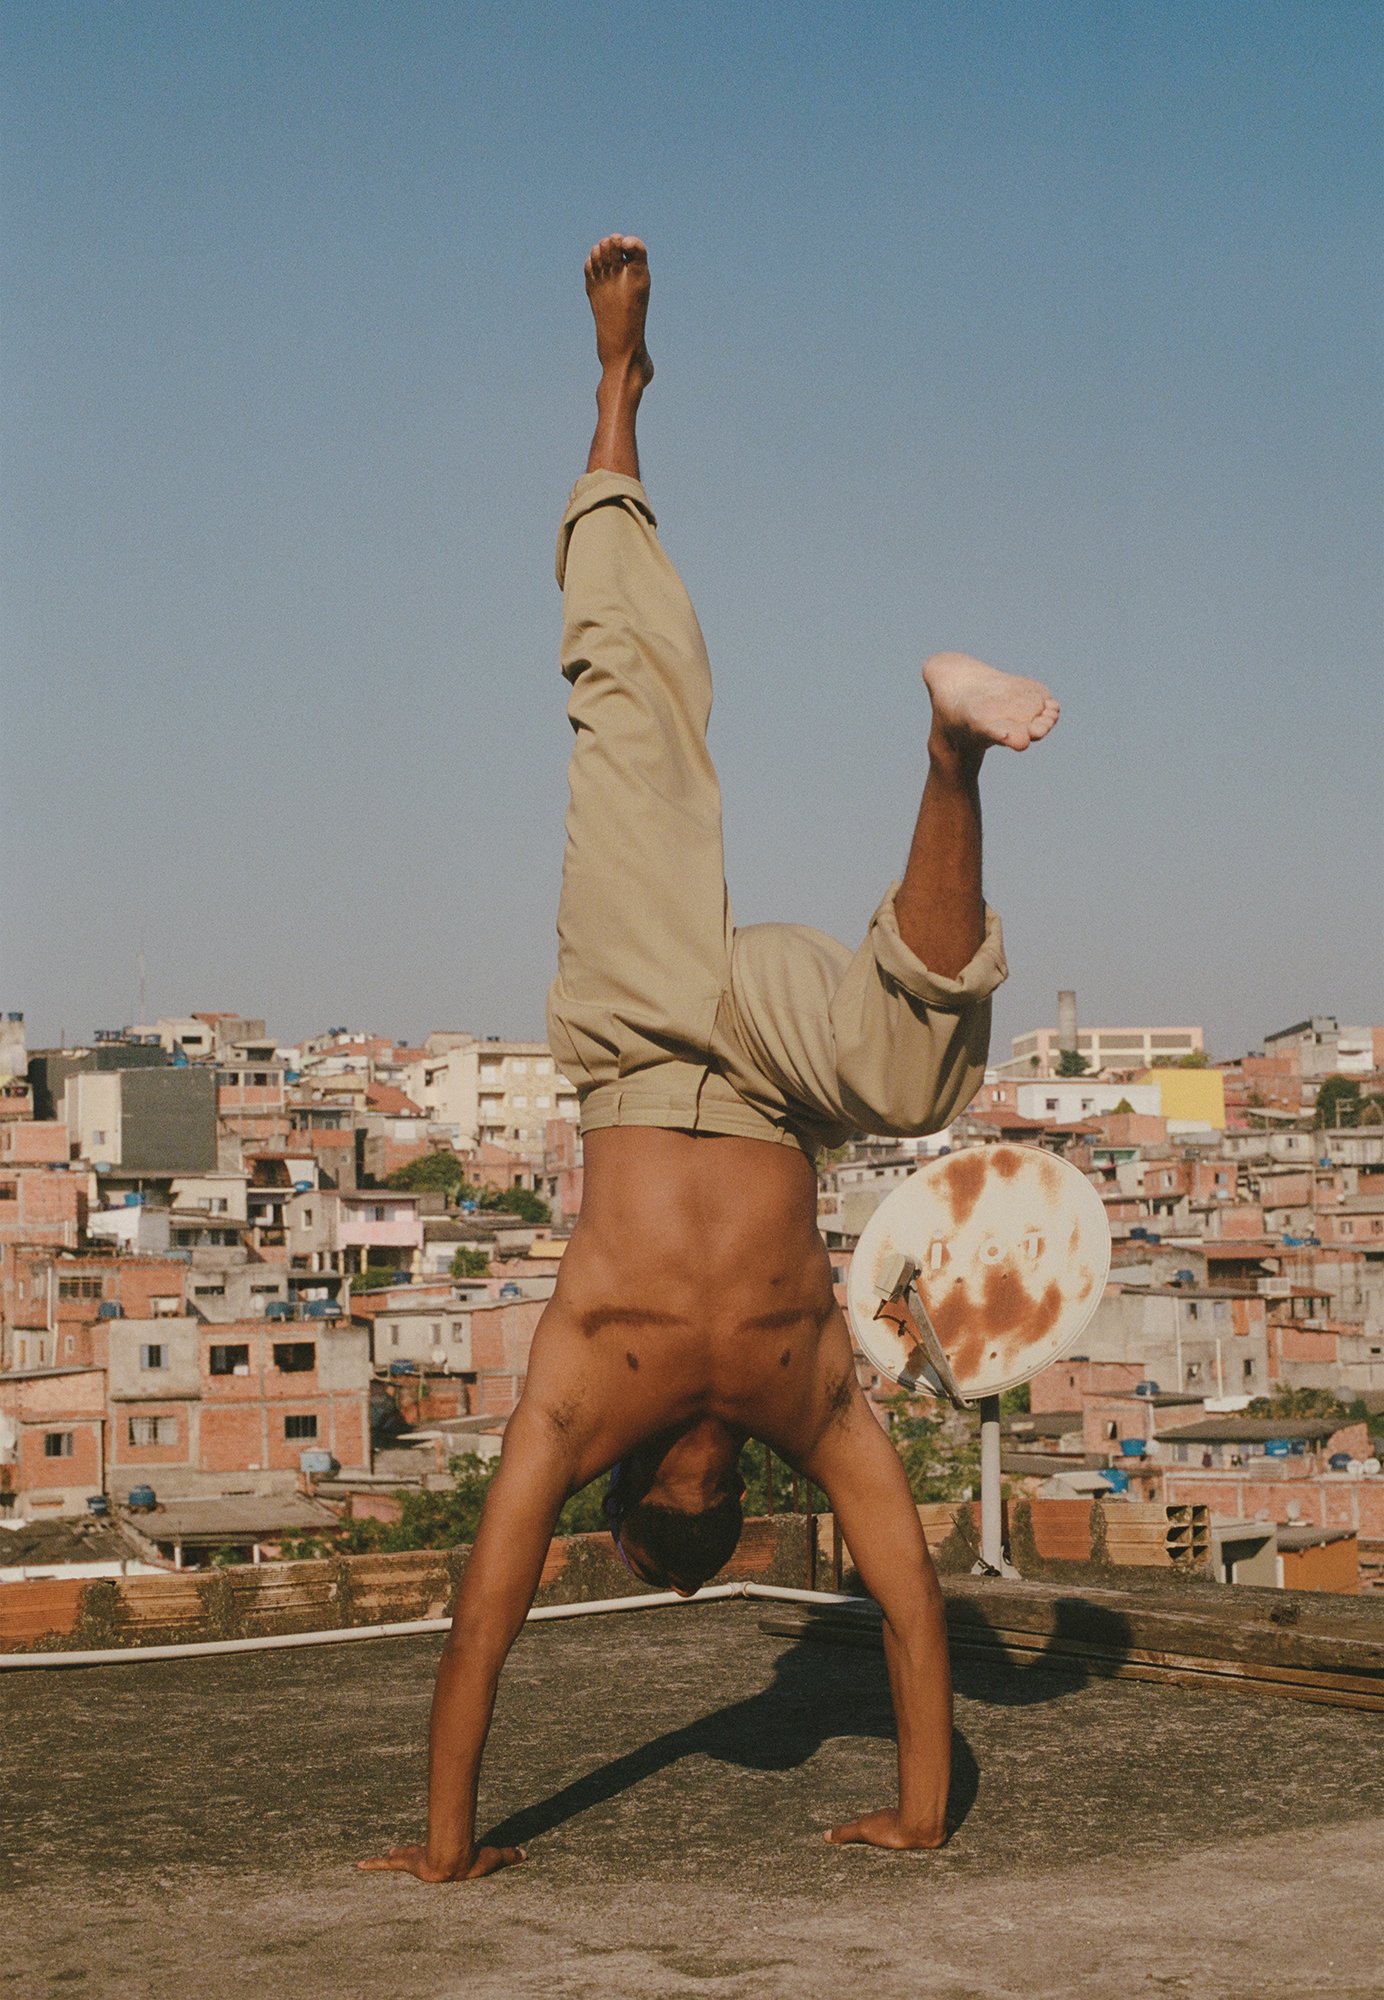 A photograph depicting person with scars on his pectoral muscles in the middle of a handstand, with Sao Paulo visible behind him.